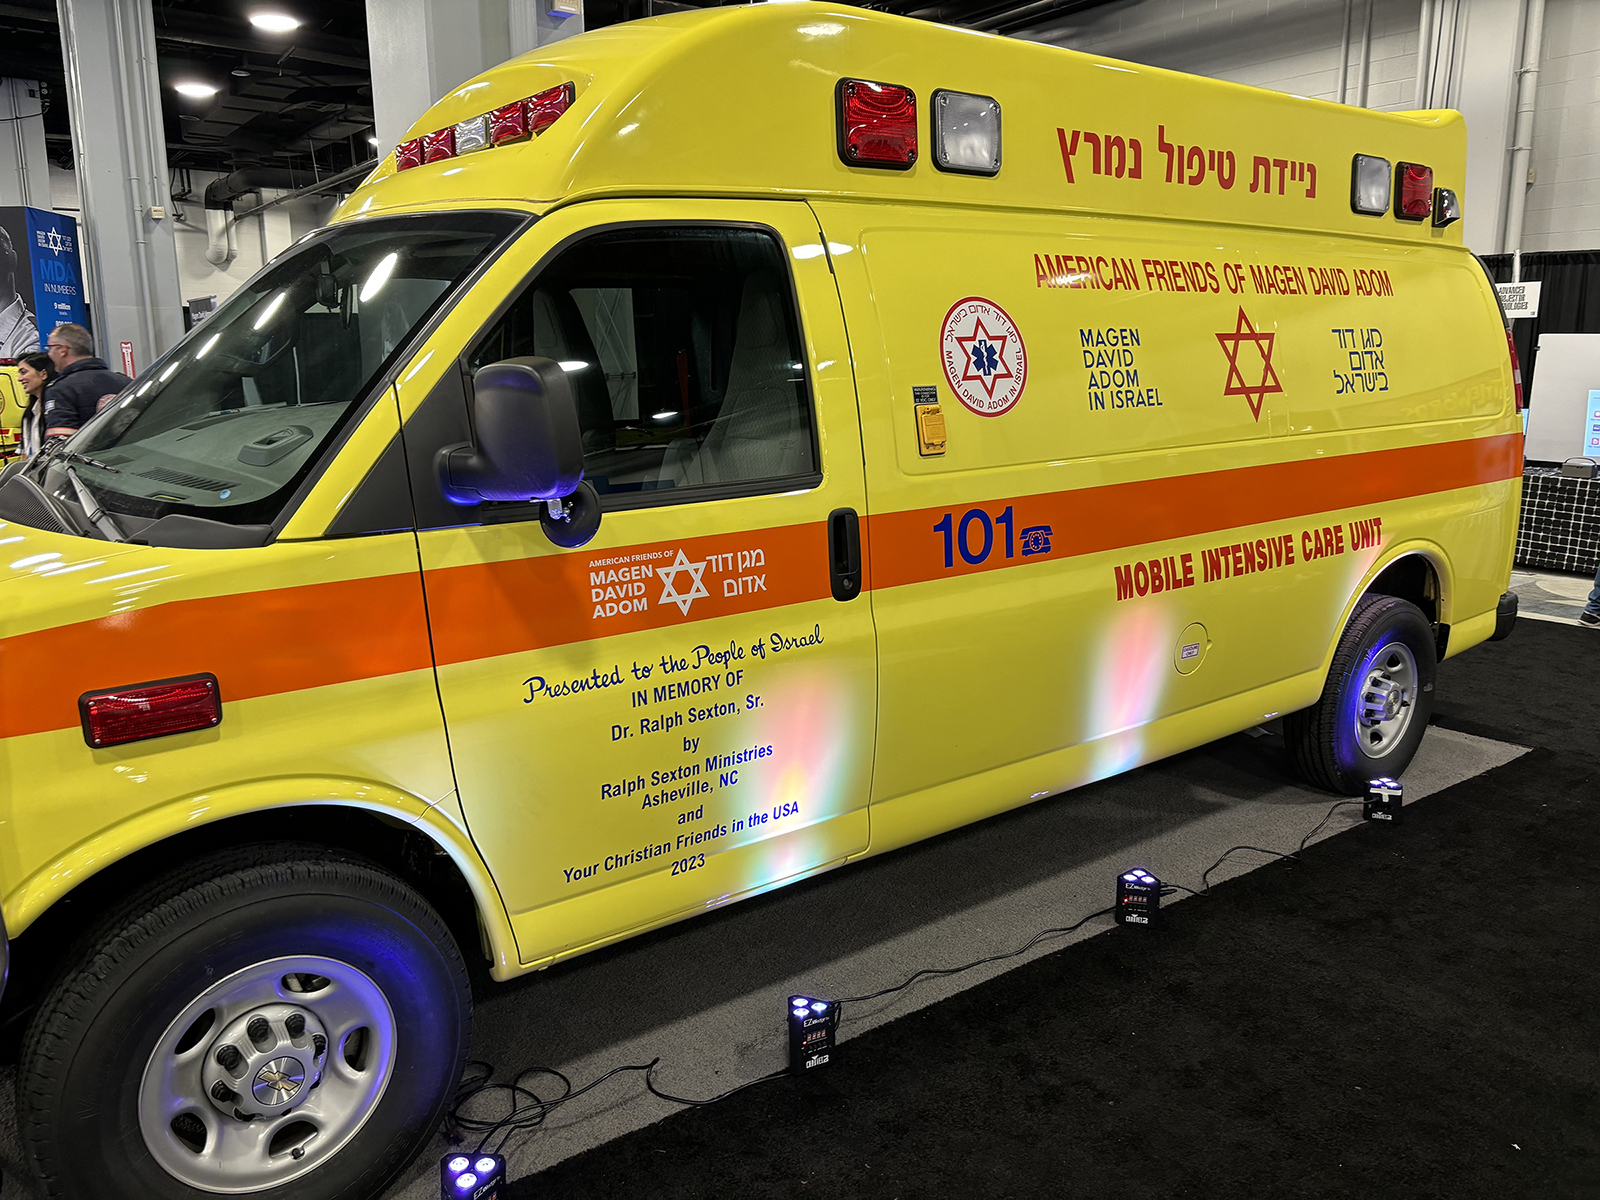 A Magen David Adom ambulance on display during the National Religious Broadcasters convention at the Gaylord Opryland Resort and Convention Center in Nashville, Tenn. (RNS photo/Bob Smietana)